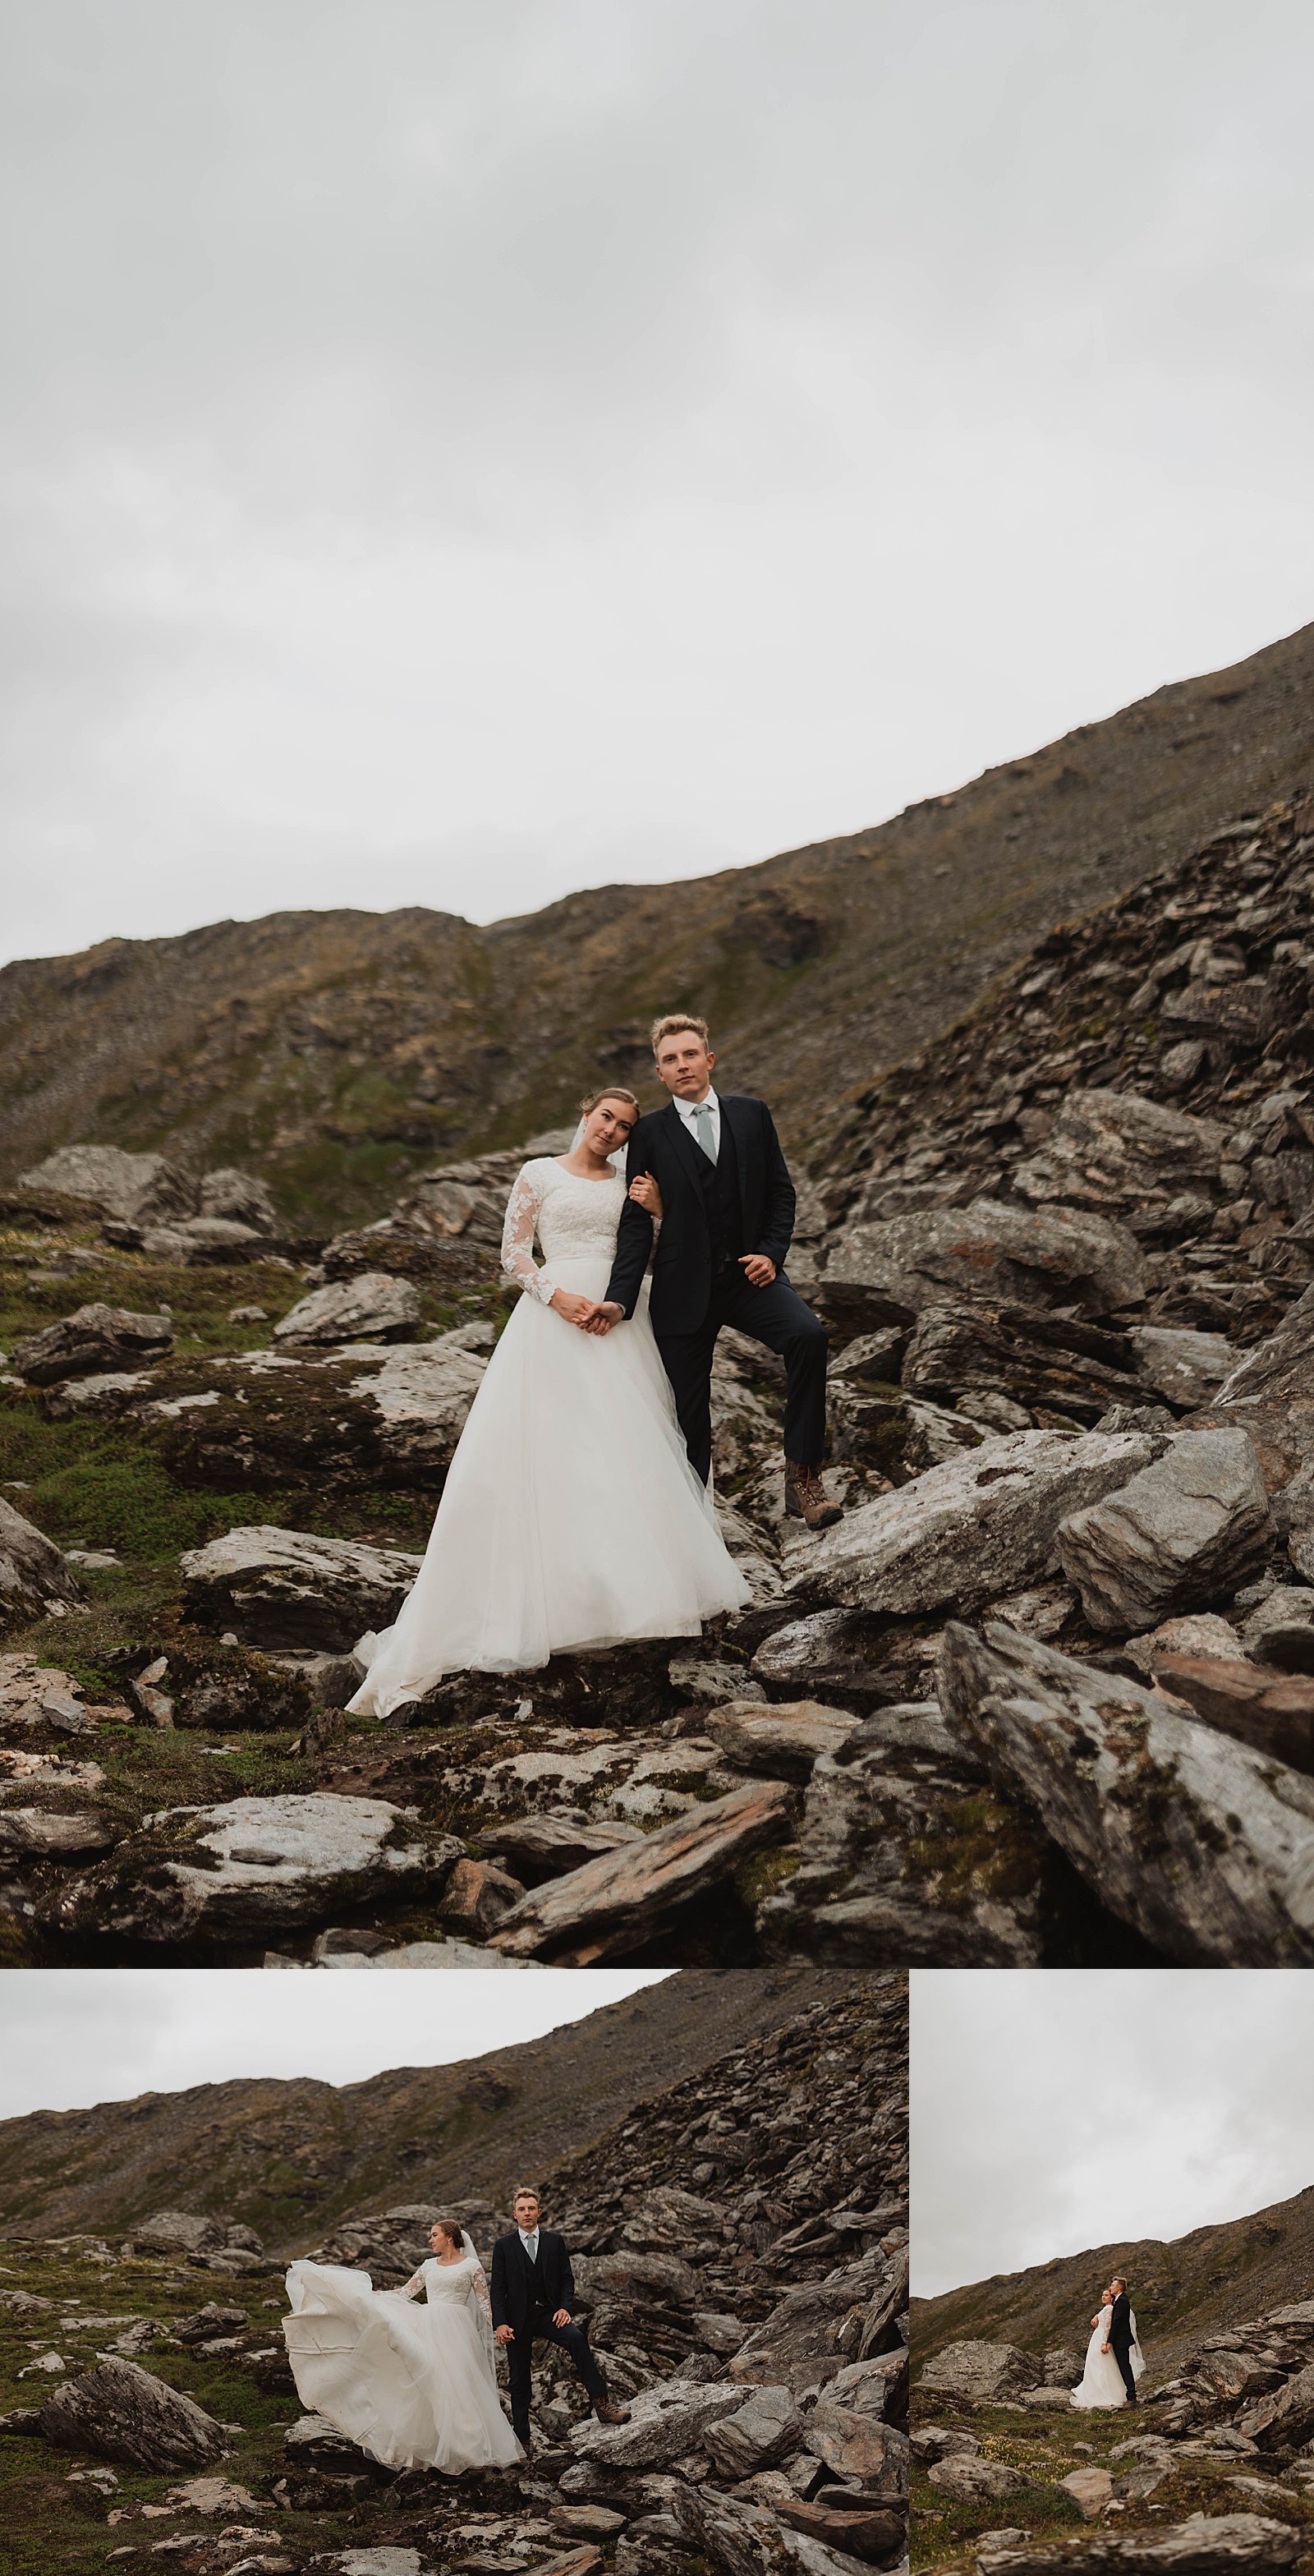  Bride and groom standing on rocks on a hill near Anchorage, Alaska for a photo session 